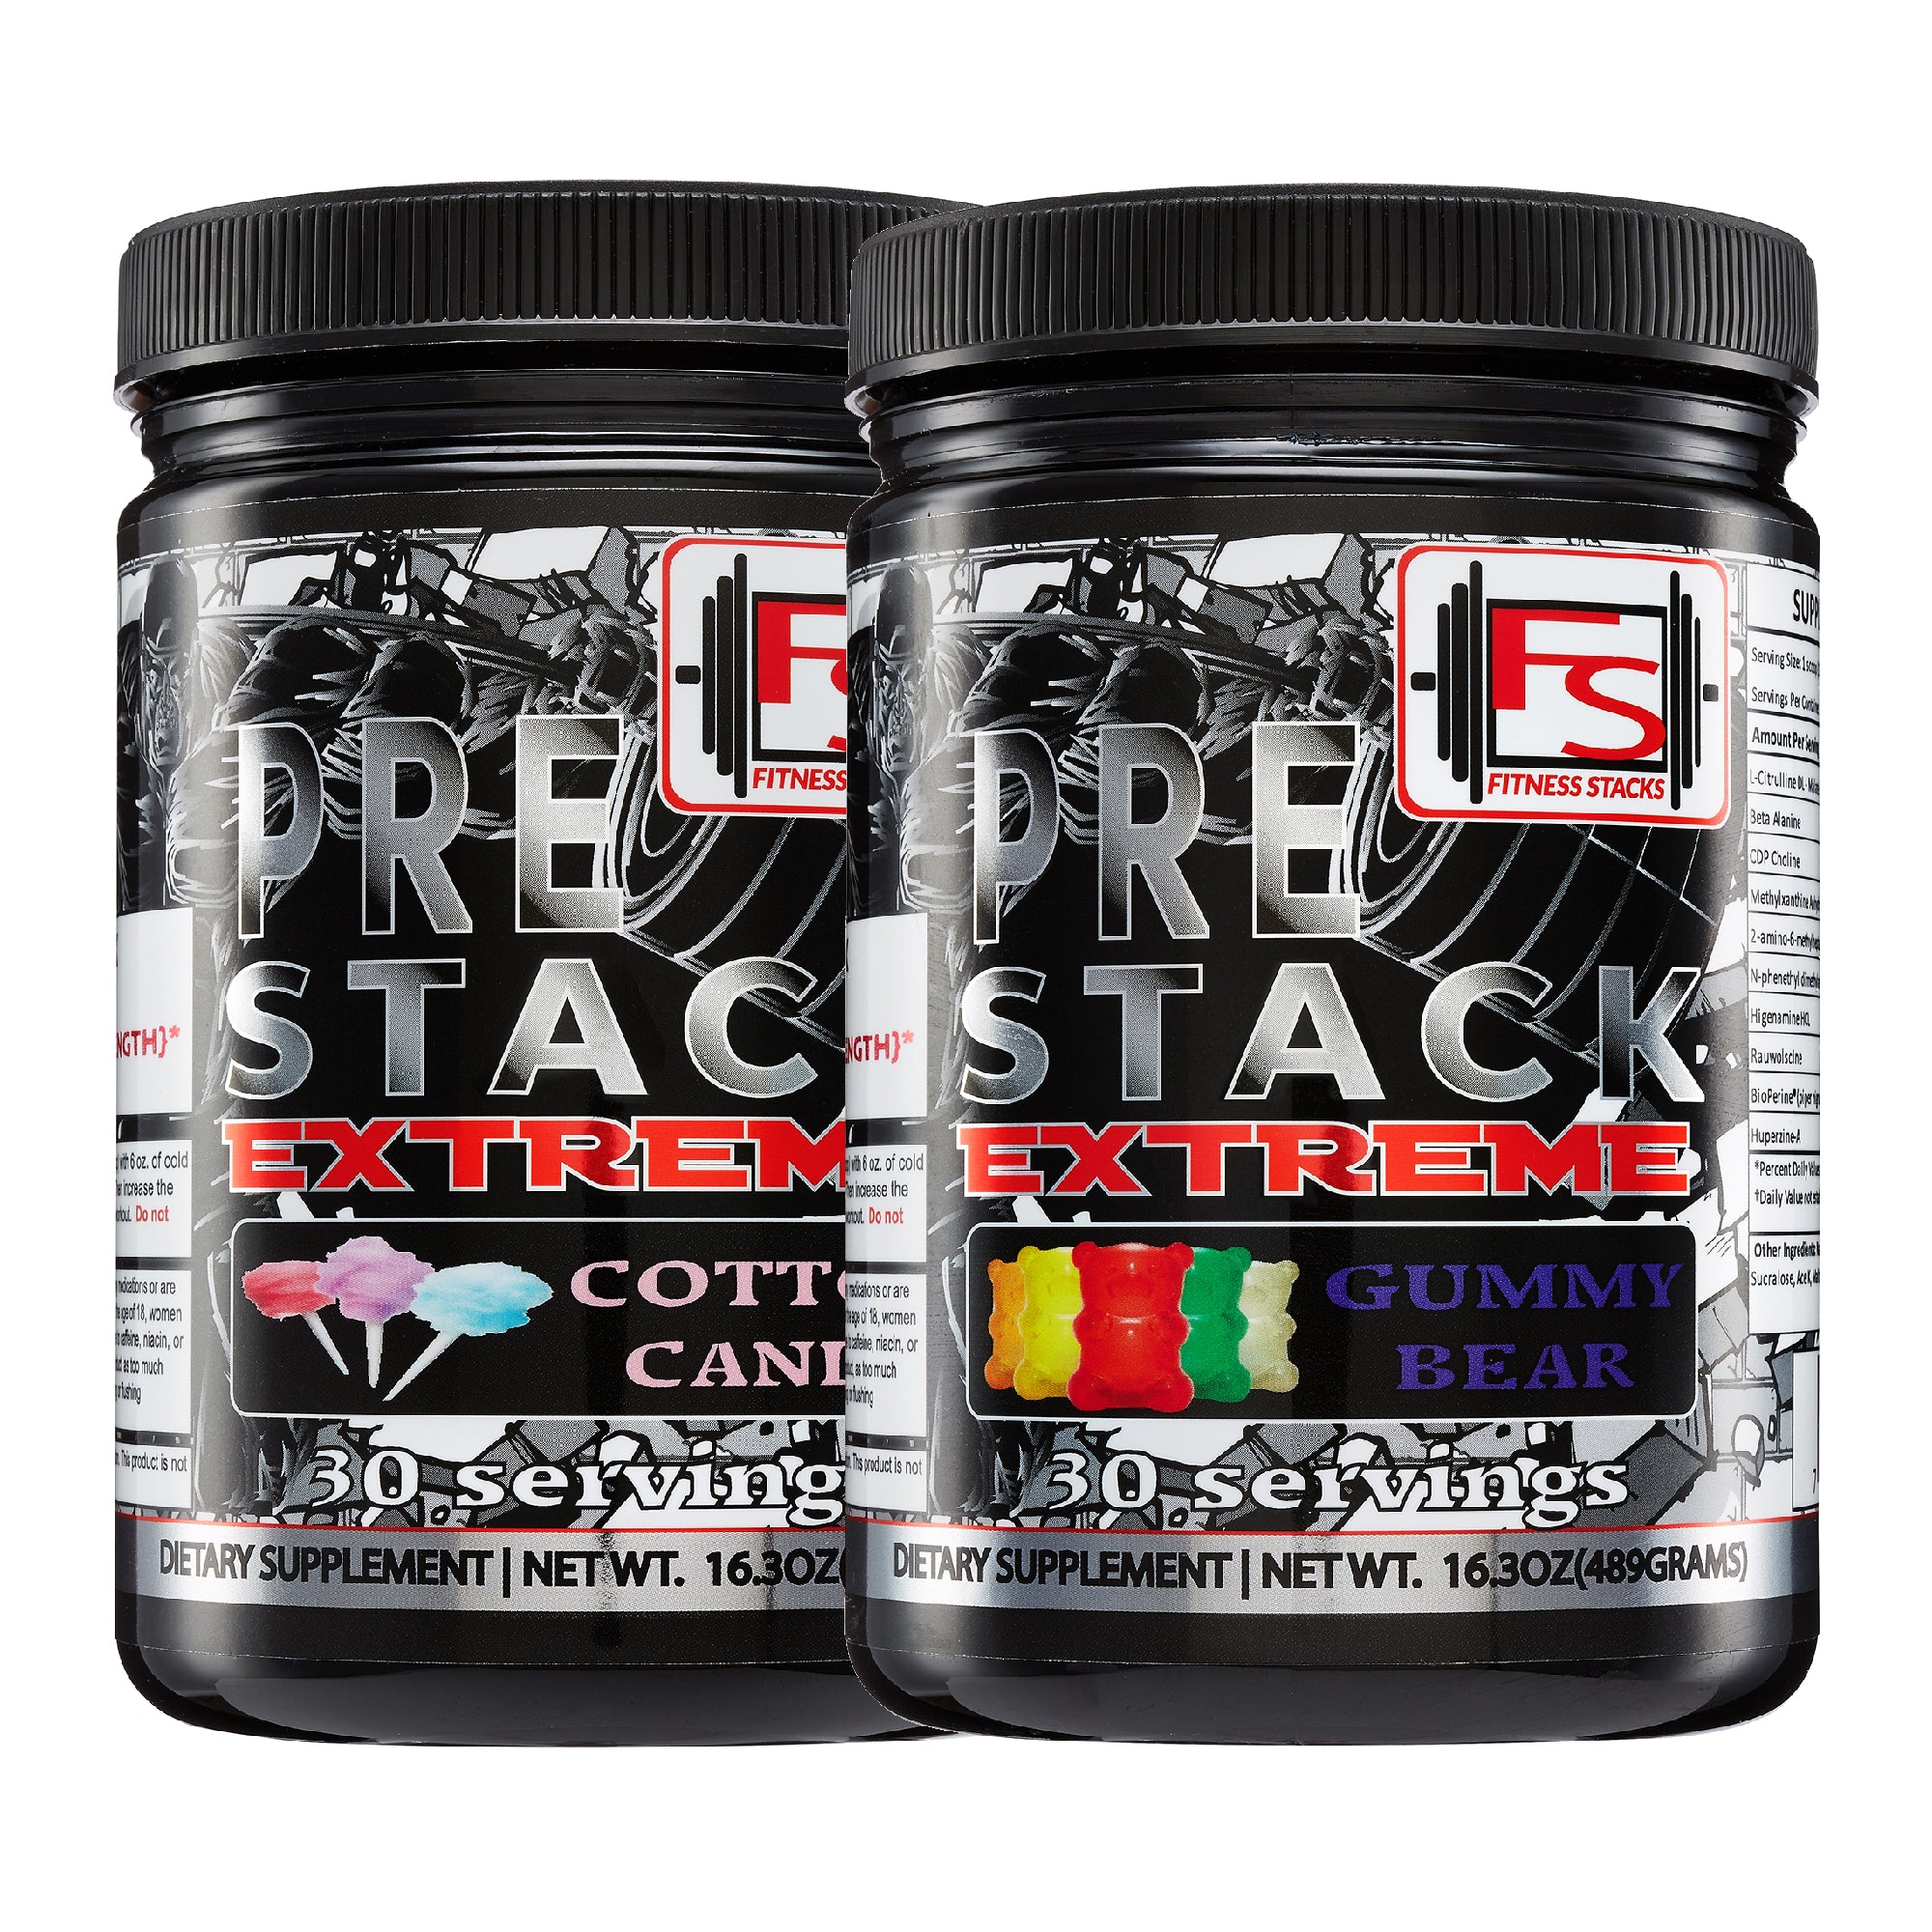 5 Day Best pre workout stack 2018 for Beginner